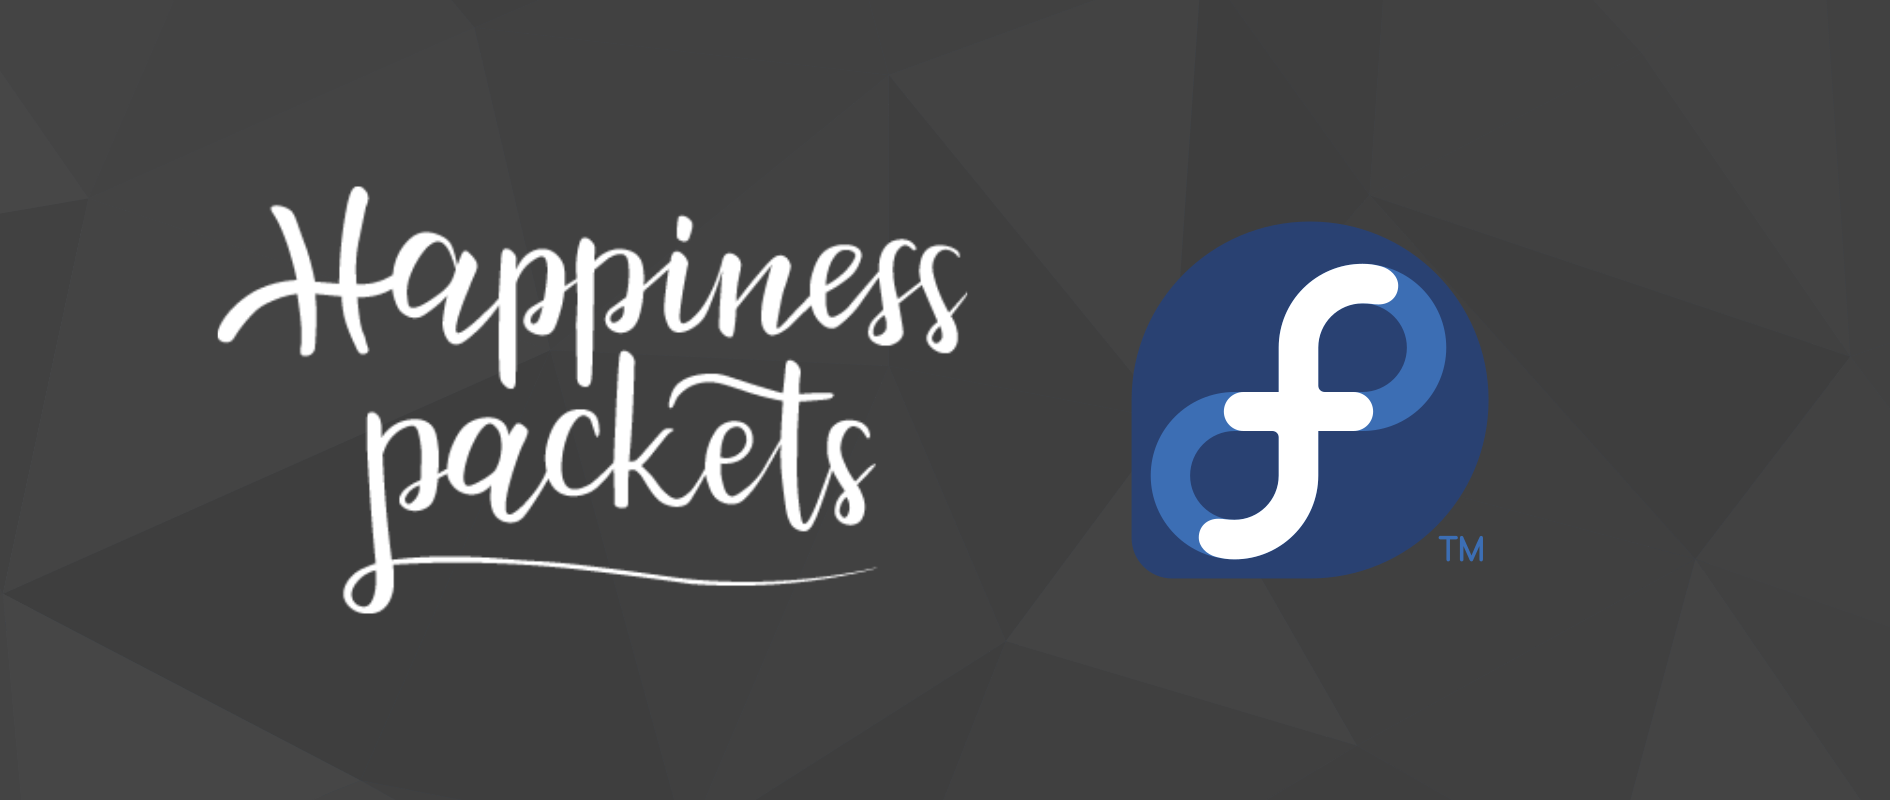 Fedora Happiness Packets - Google Summer of Code (GSoC) 2018 project